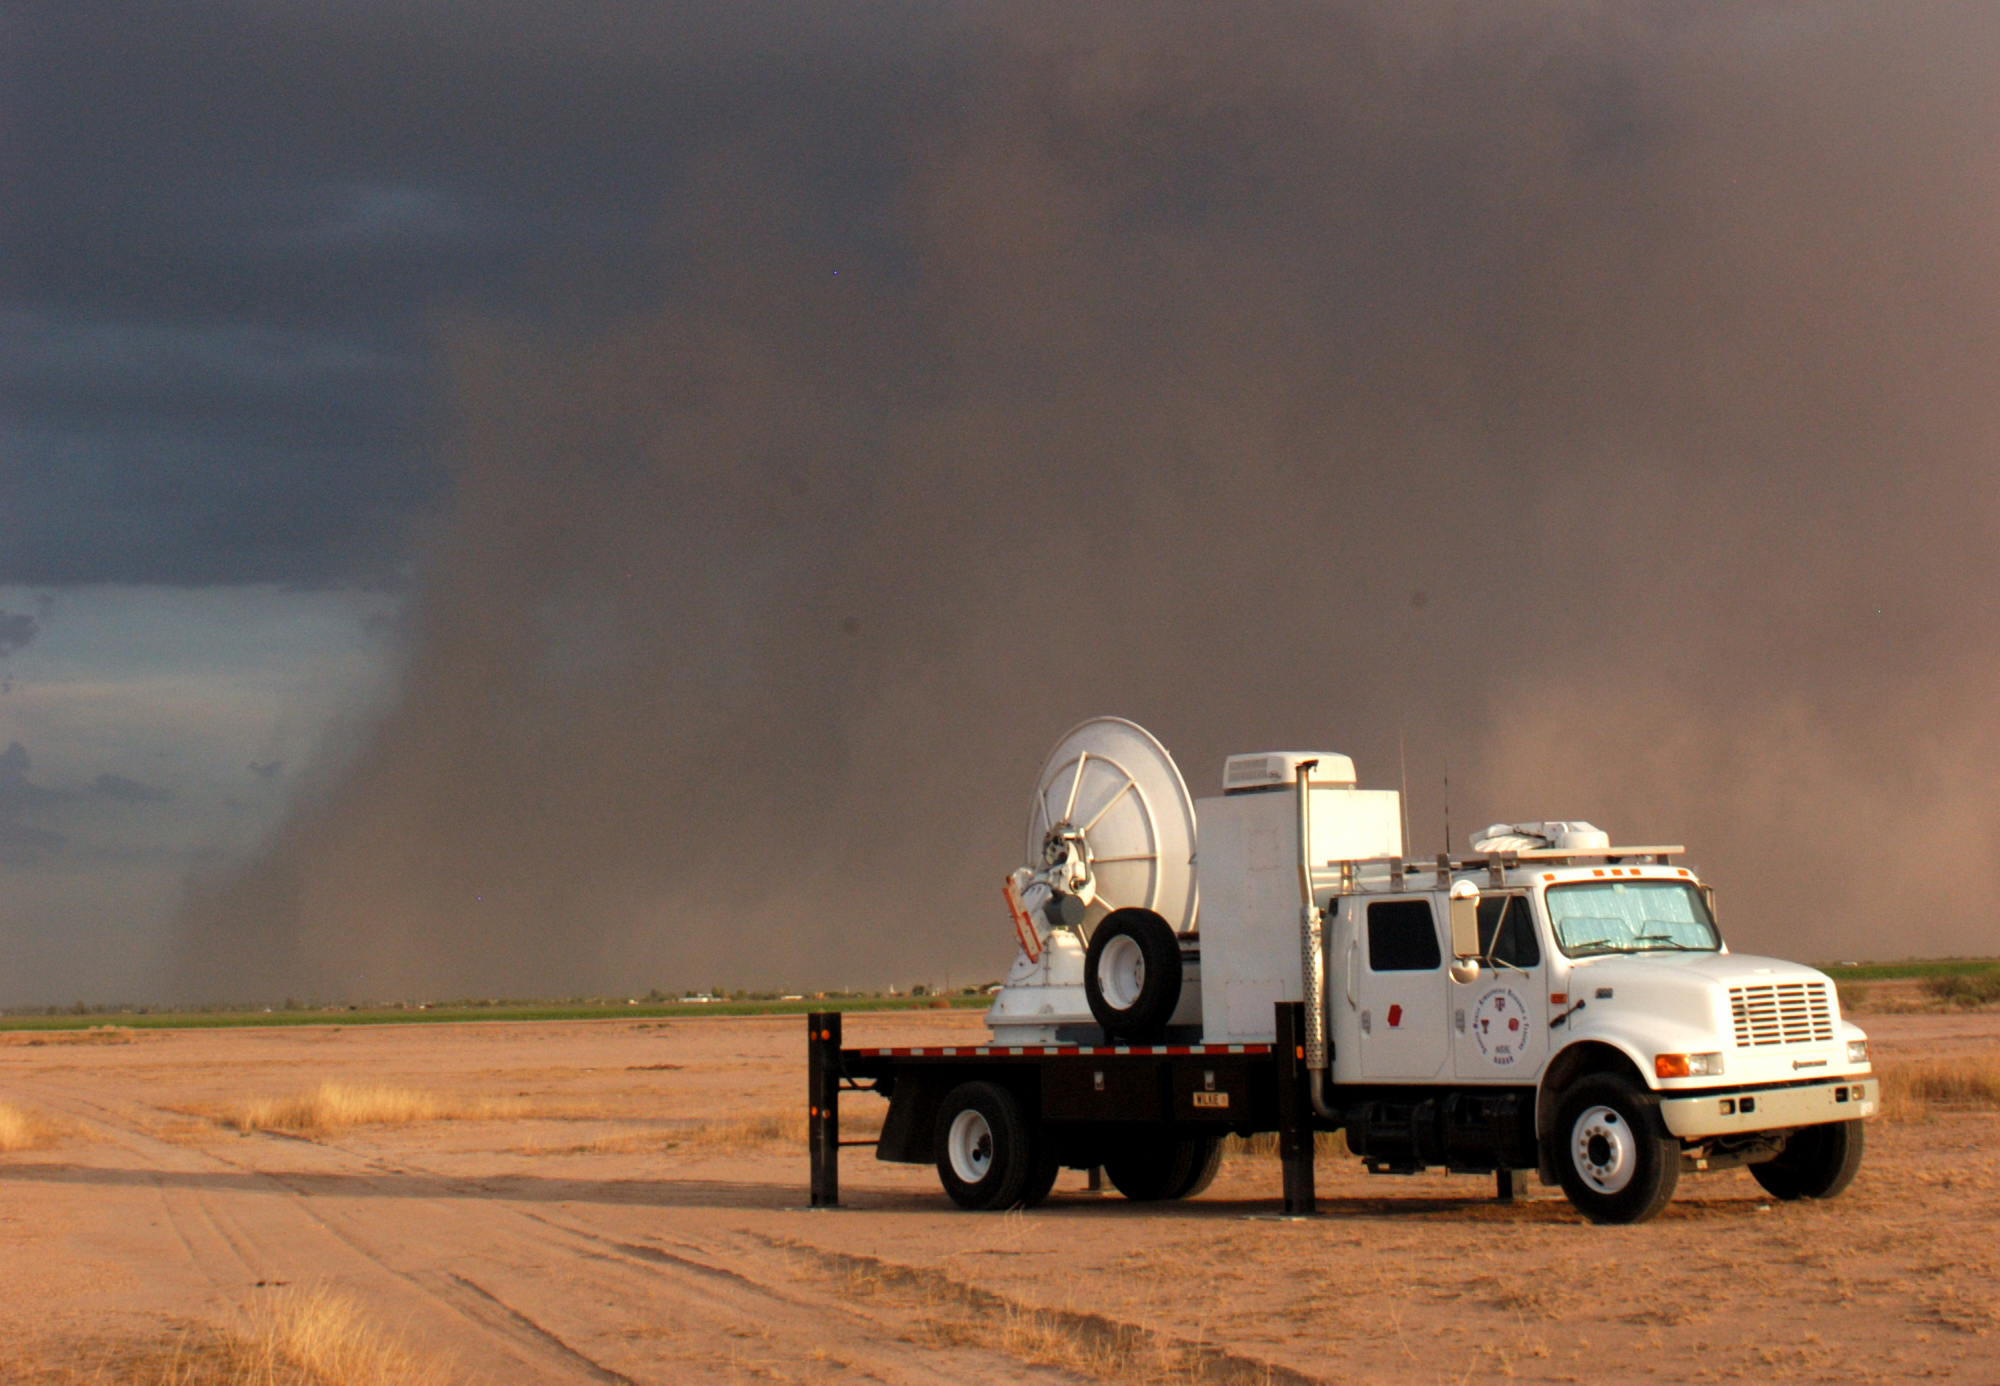 NSSL partnership with private industry benefits thousands in Arizona